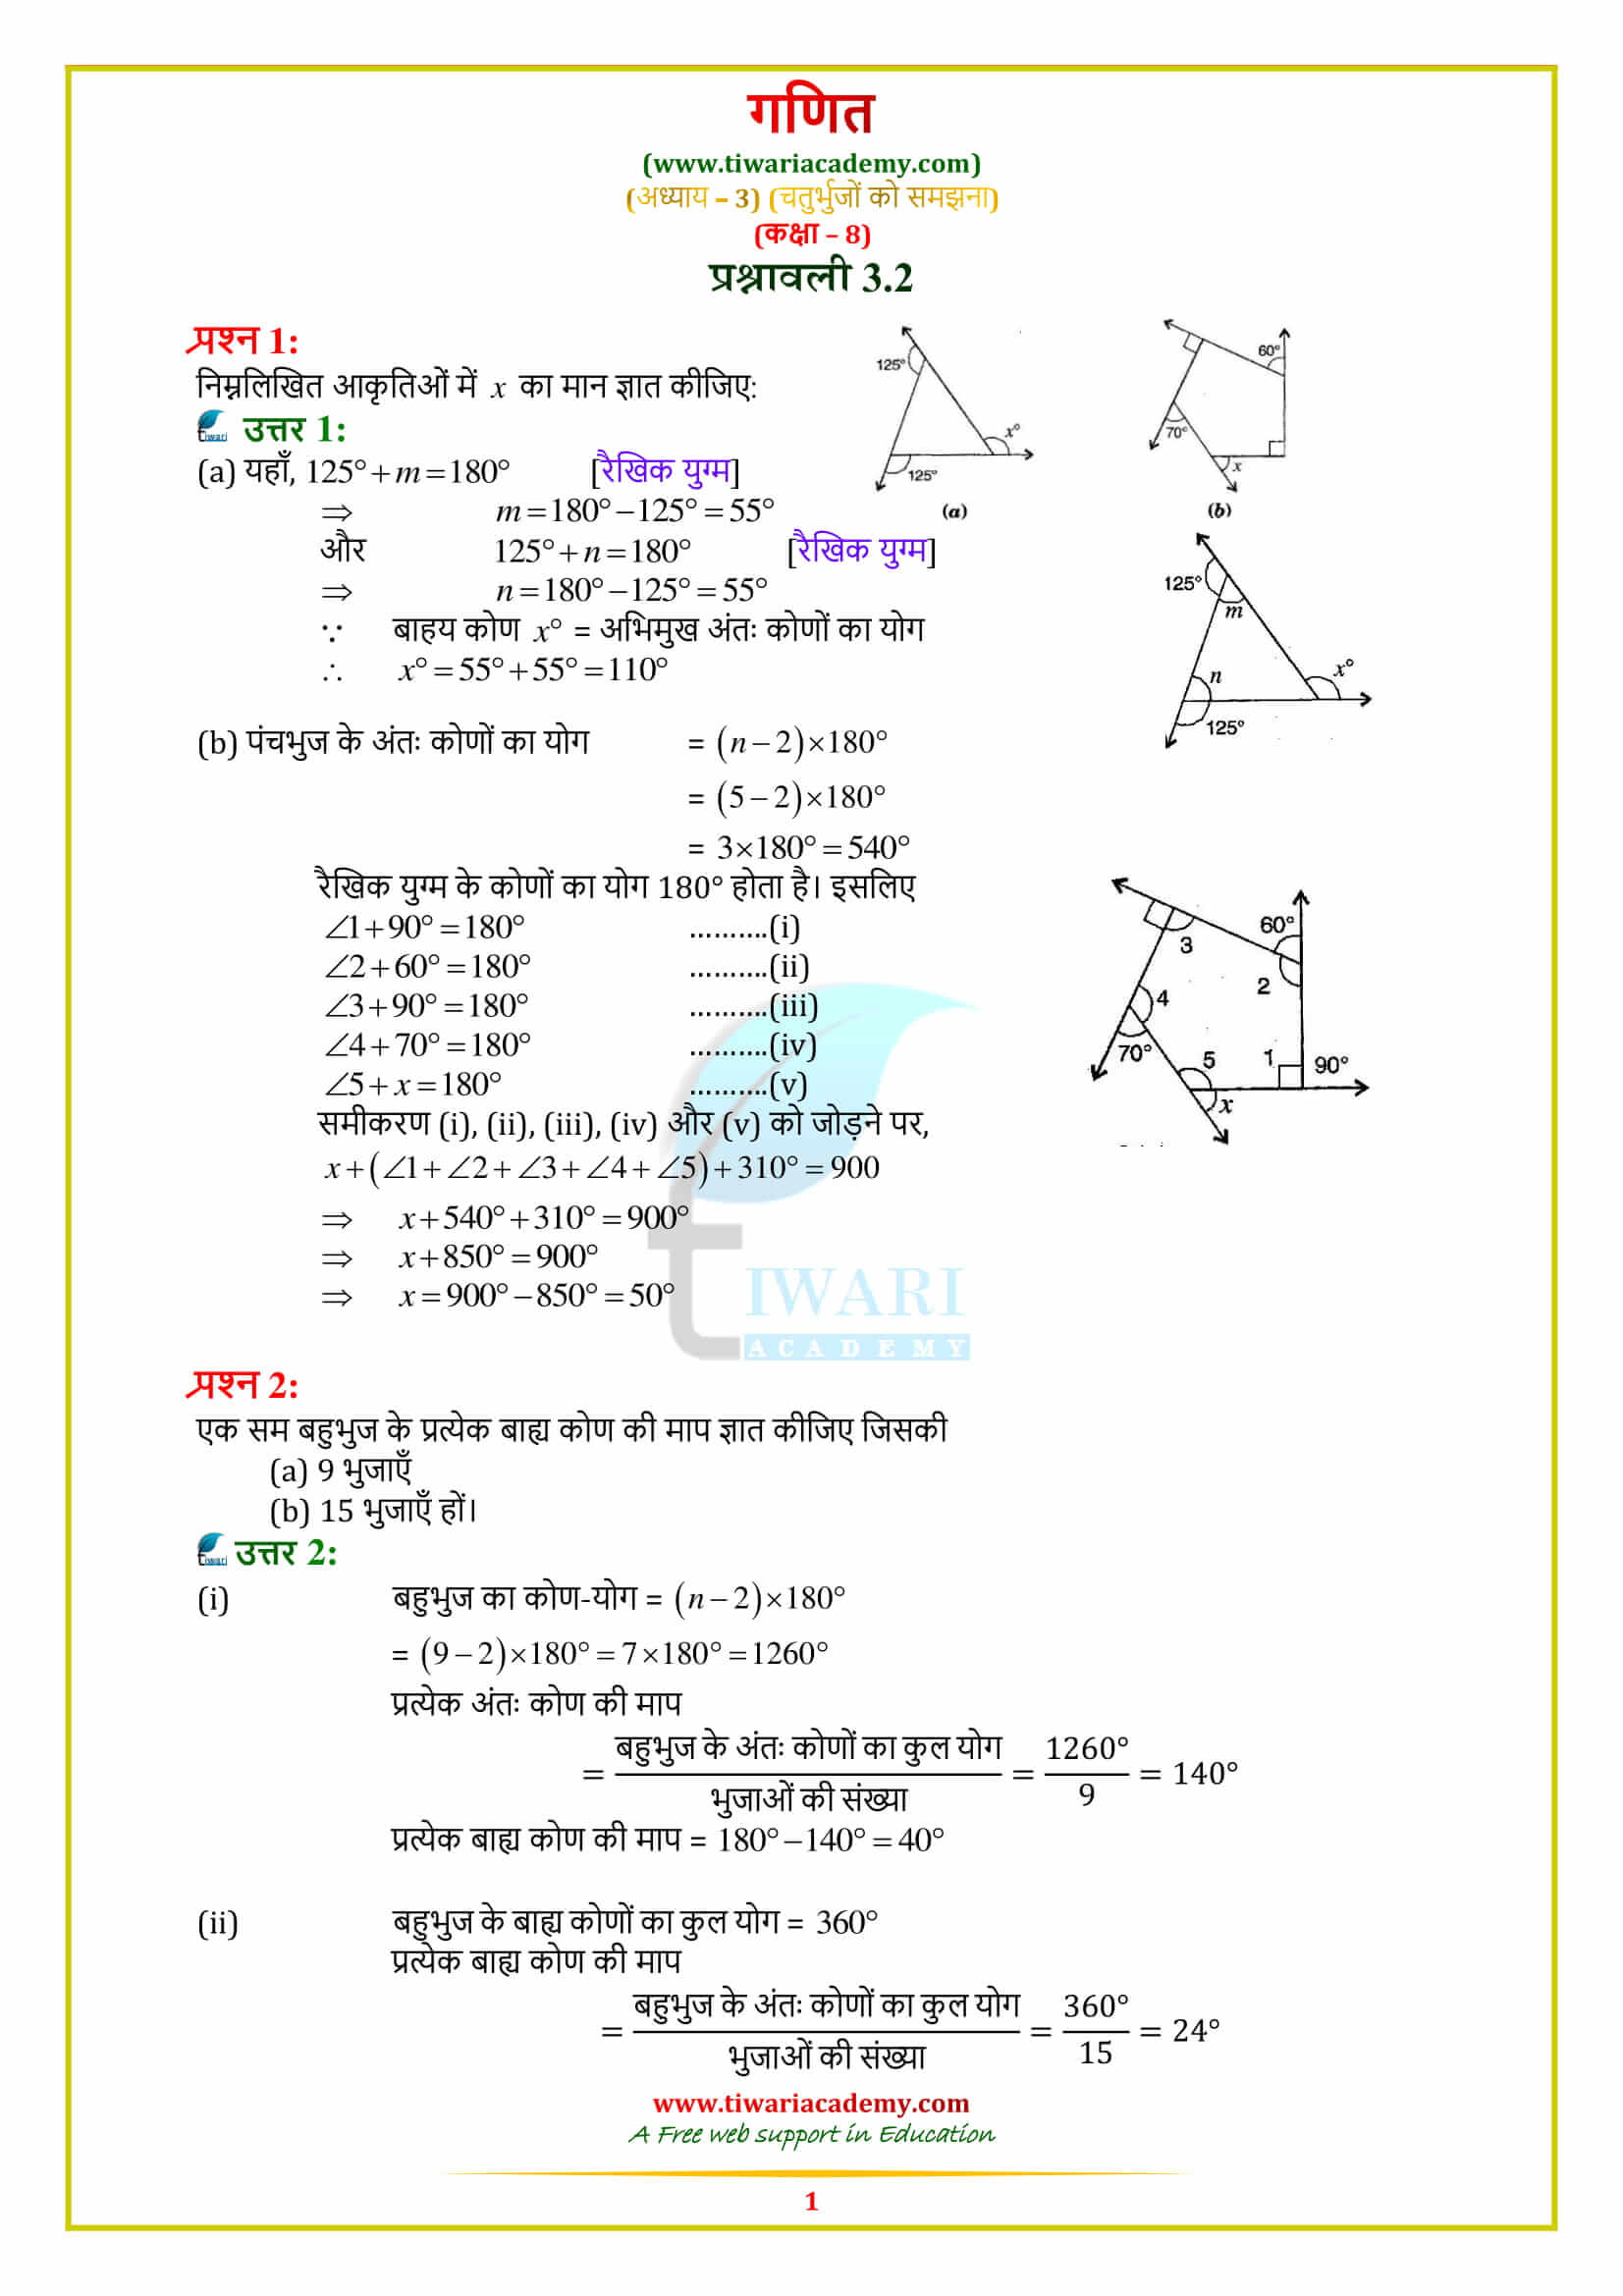 8 Maths Exercise 3.2 Solutions in hindi medium